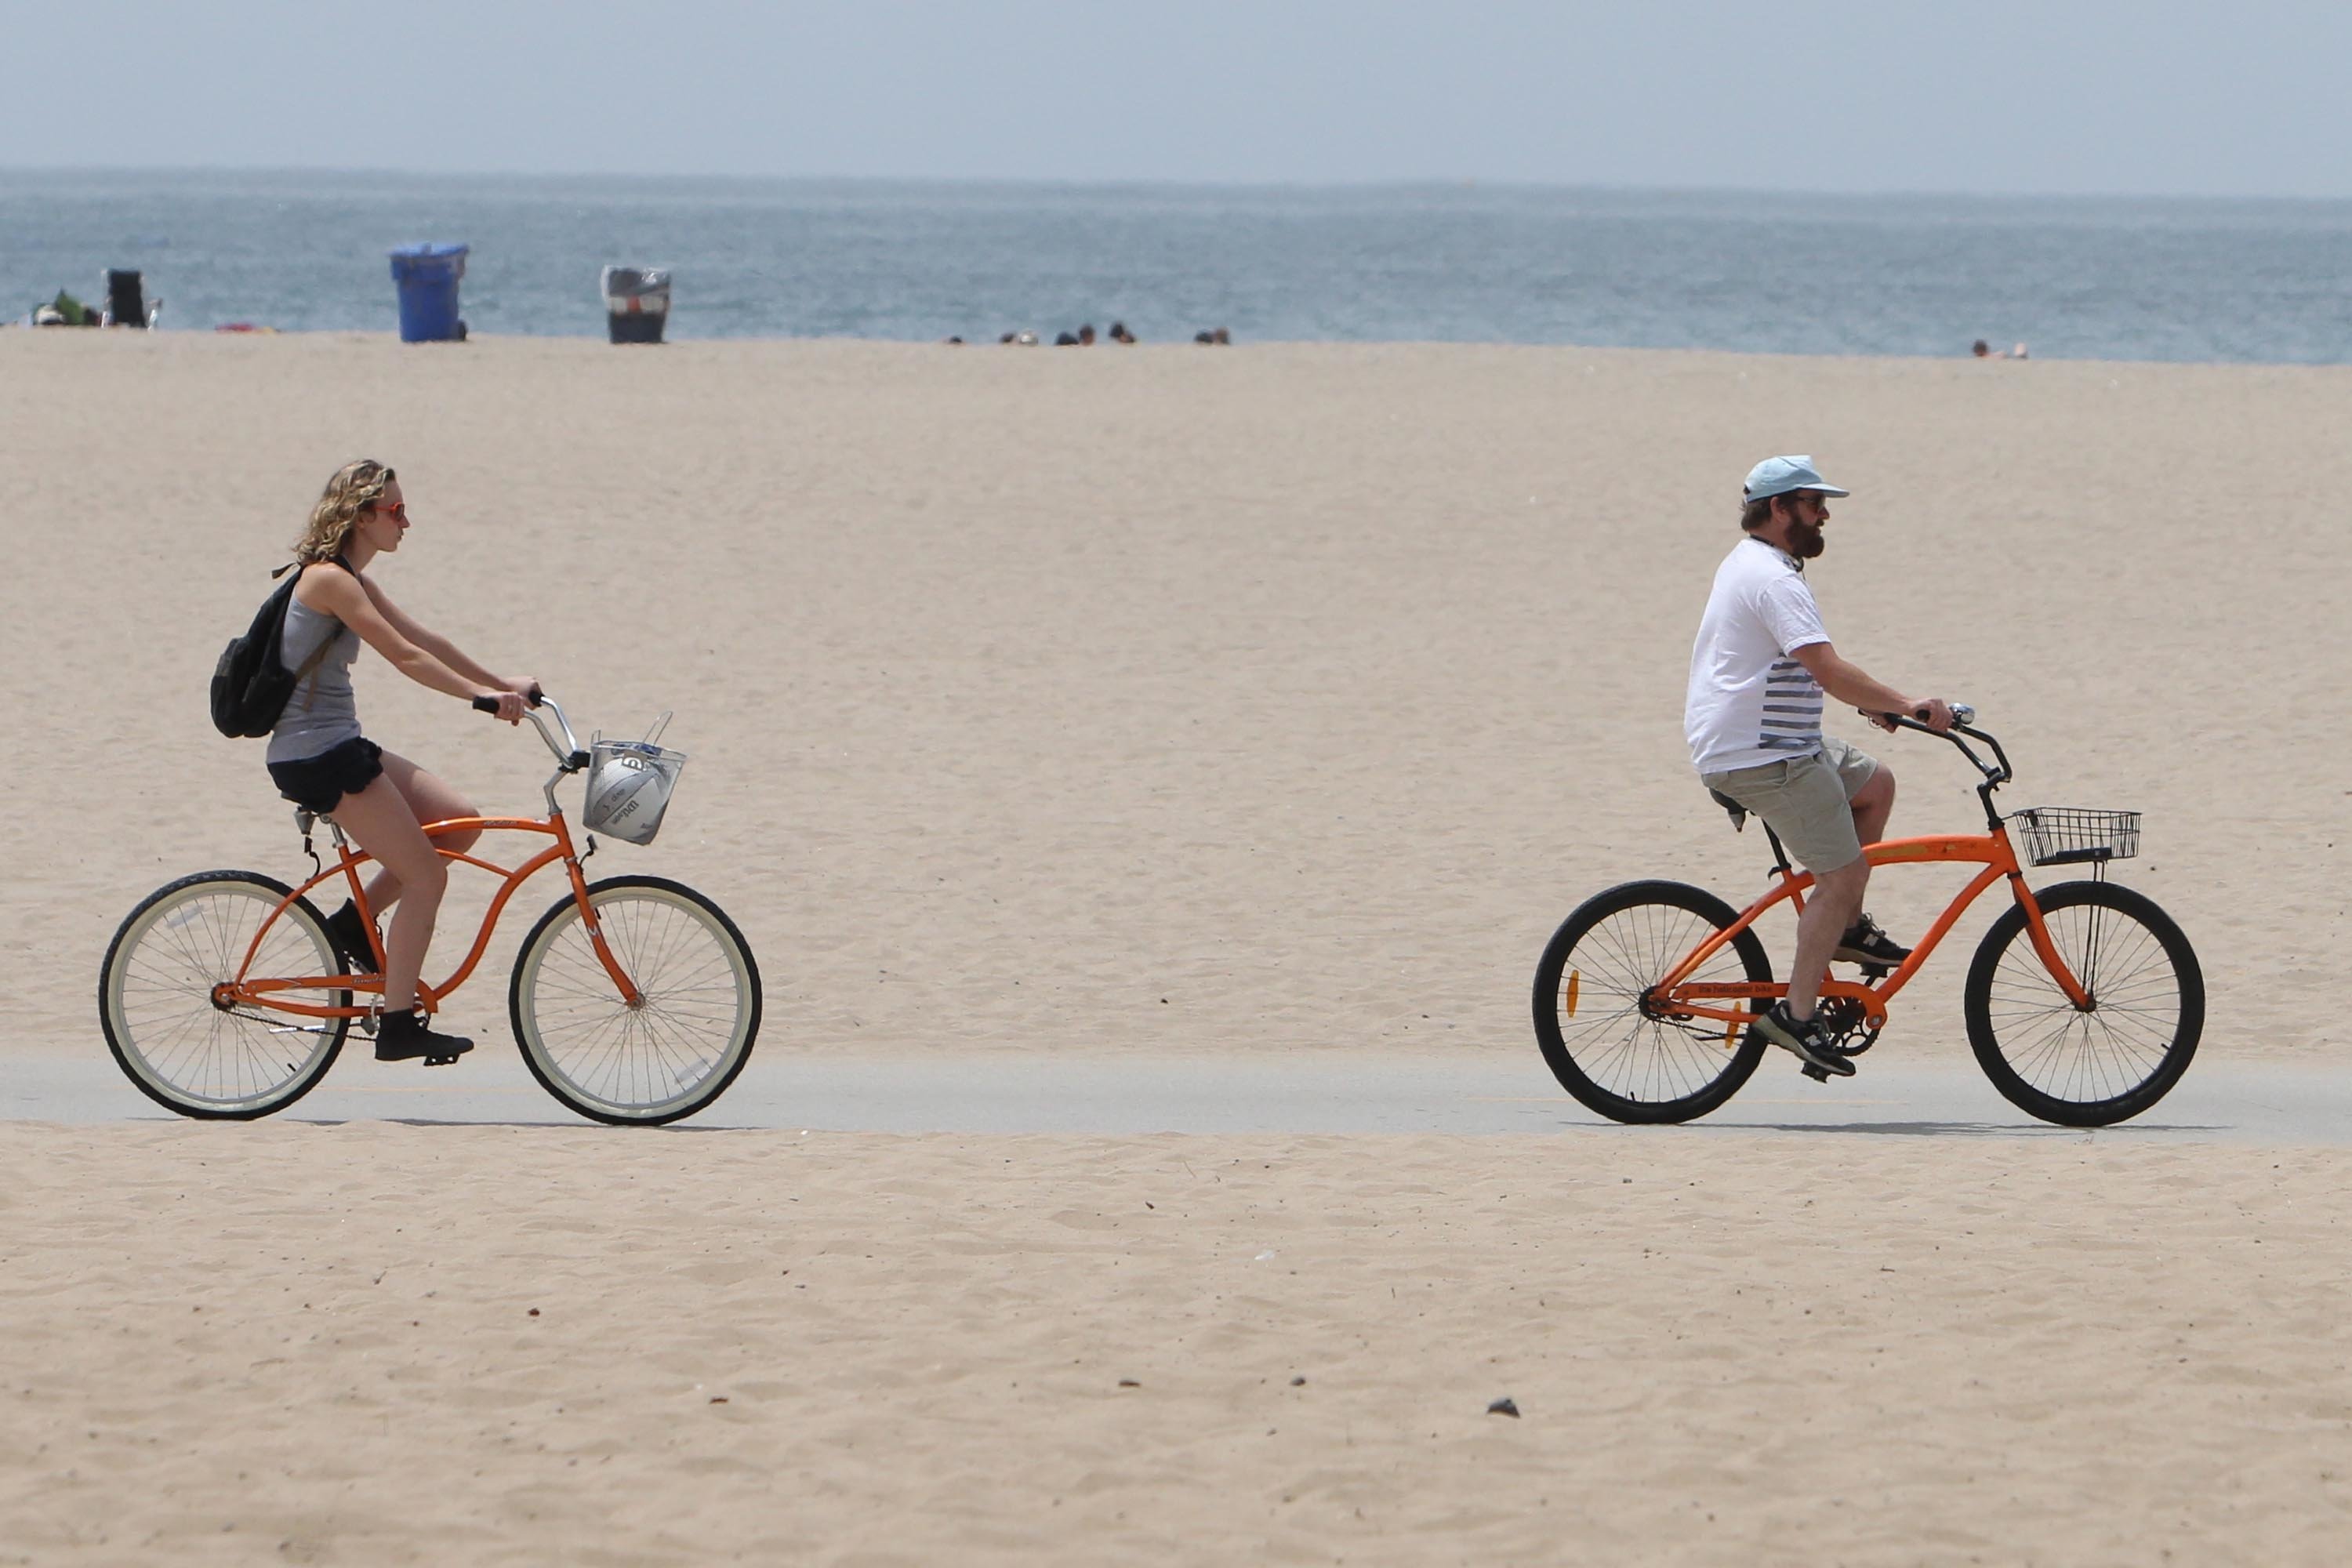 Zach Galifianakis and Quinn Lundberg Los Angeles July 25 2010 Zach Galifianakis and girlfriend Quinn Lundberg ride beach cruisers along with a friend on Venice Boardwalk. | Source: Getty Images 